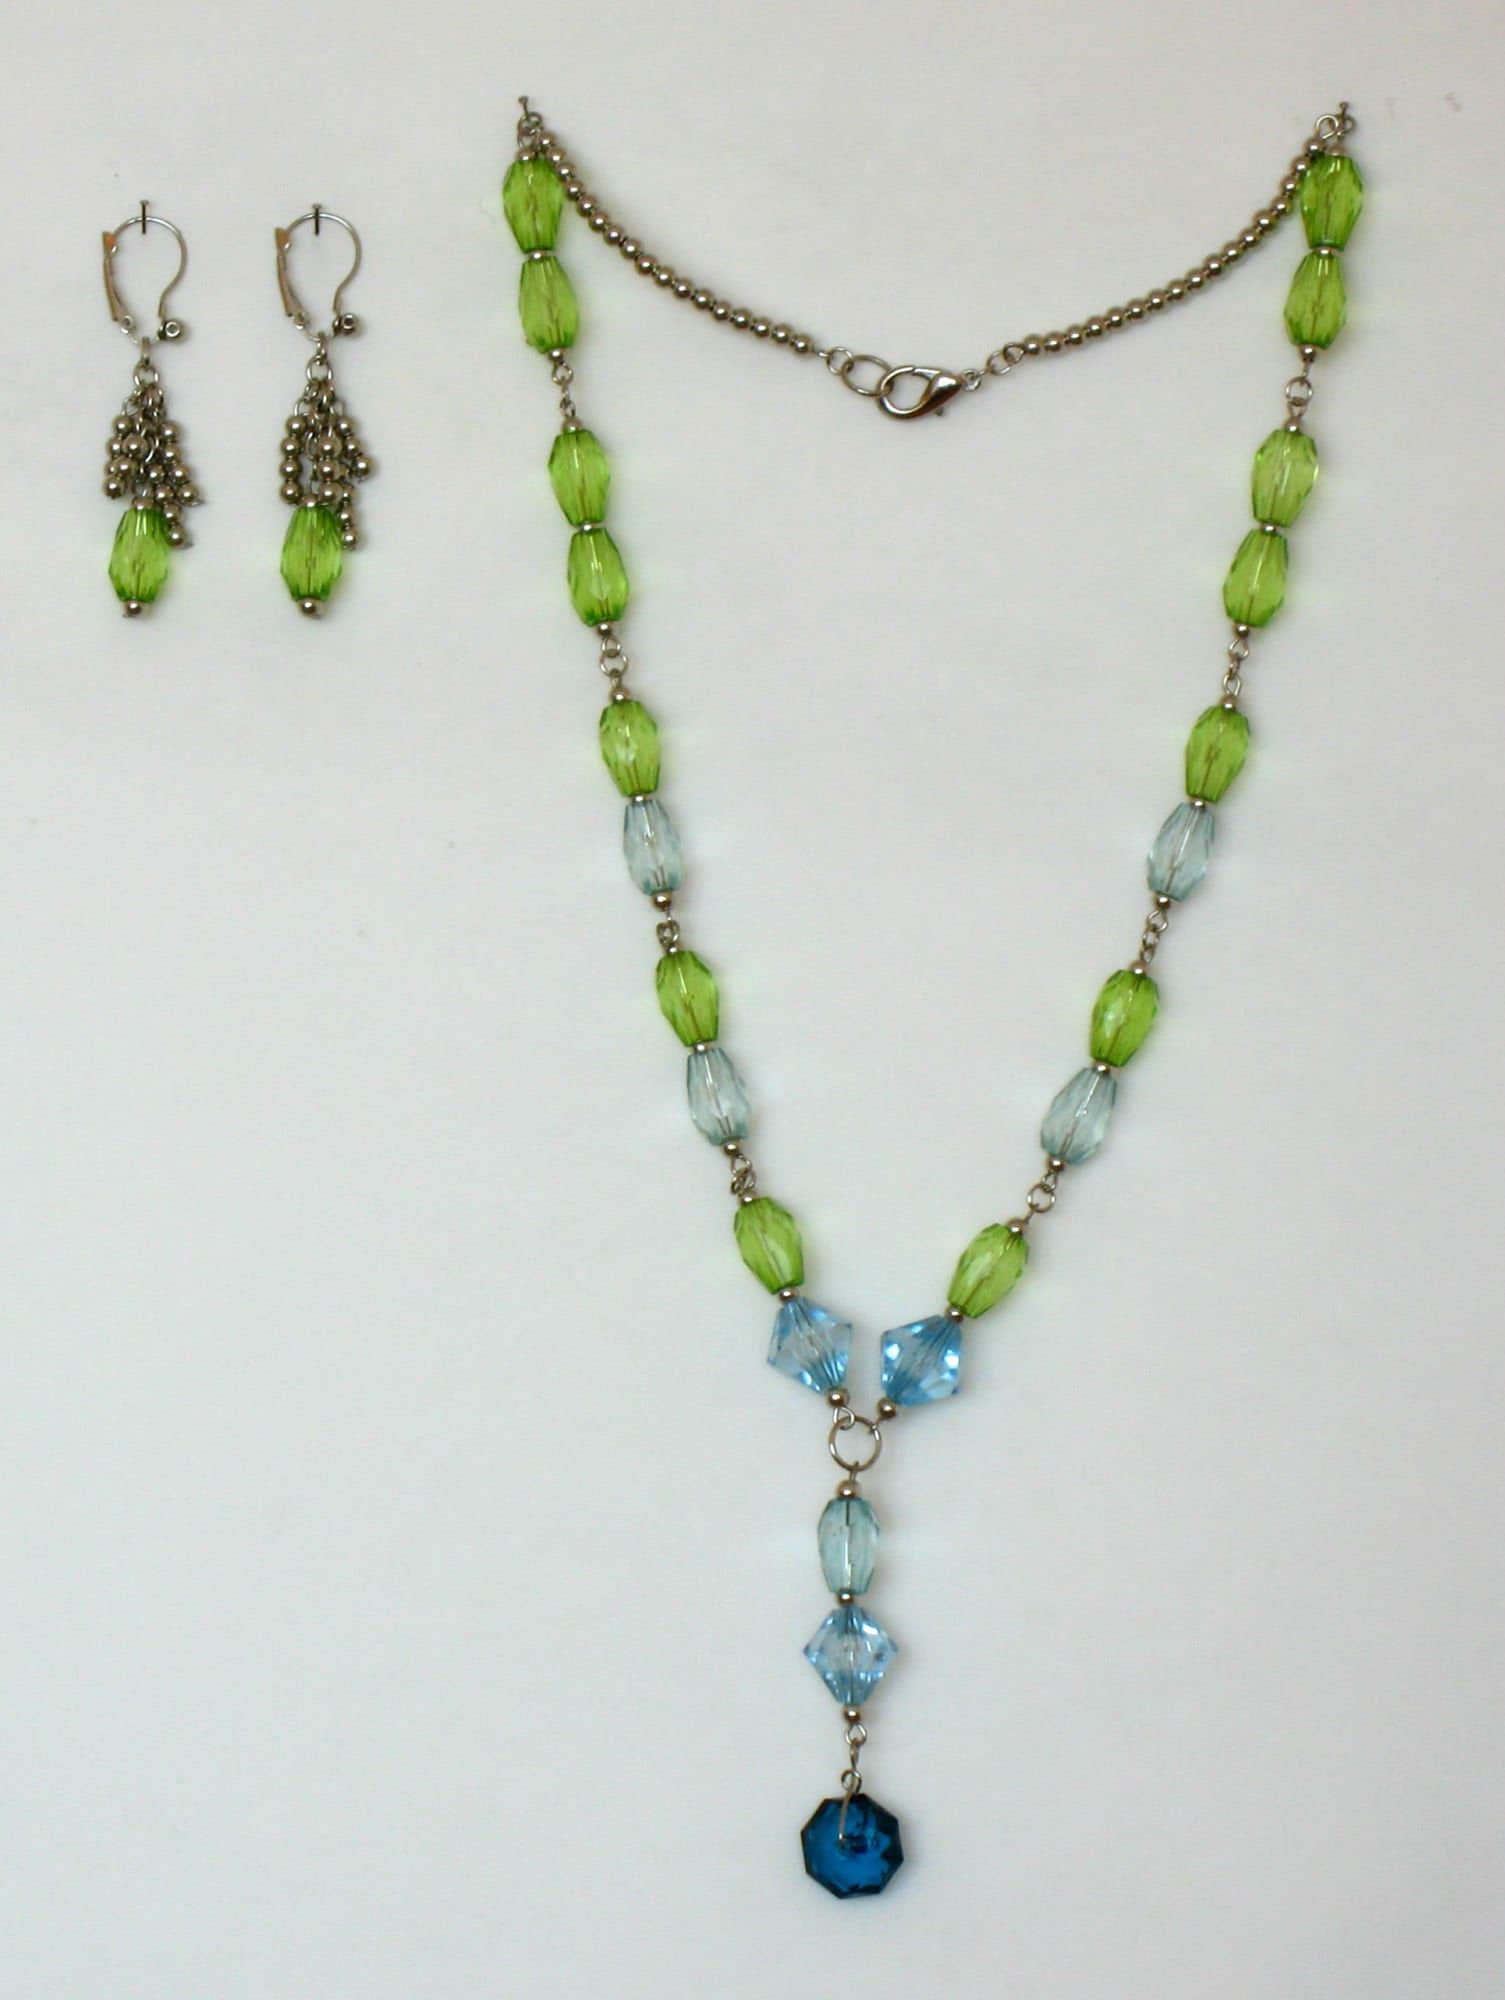 Green Crystal Plastic Beads Necklace Green Earrings Jewelry - Etsy